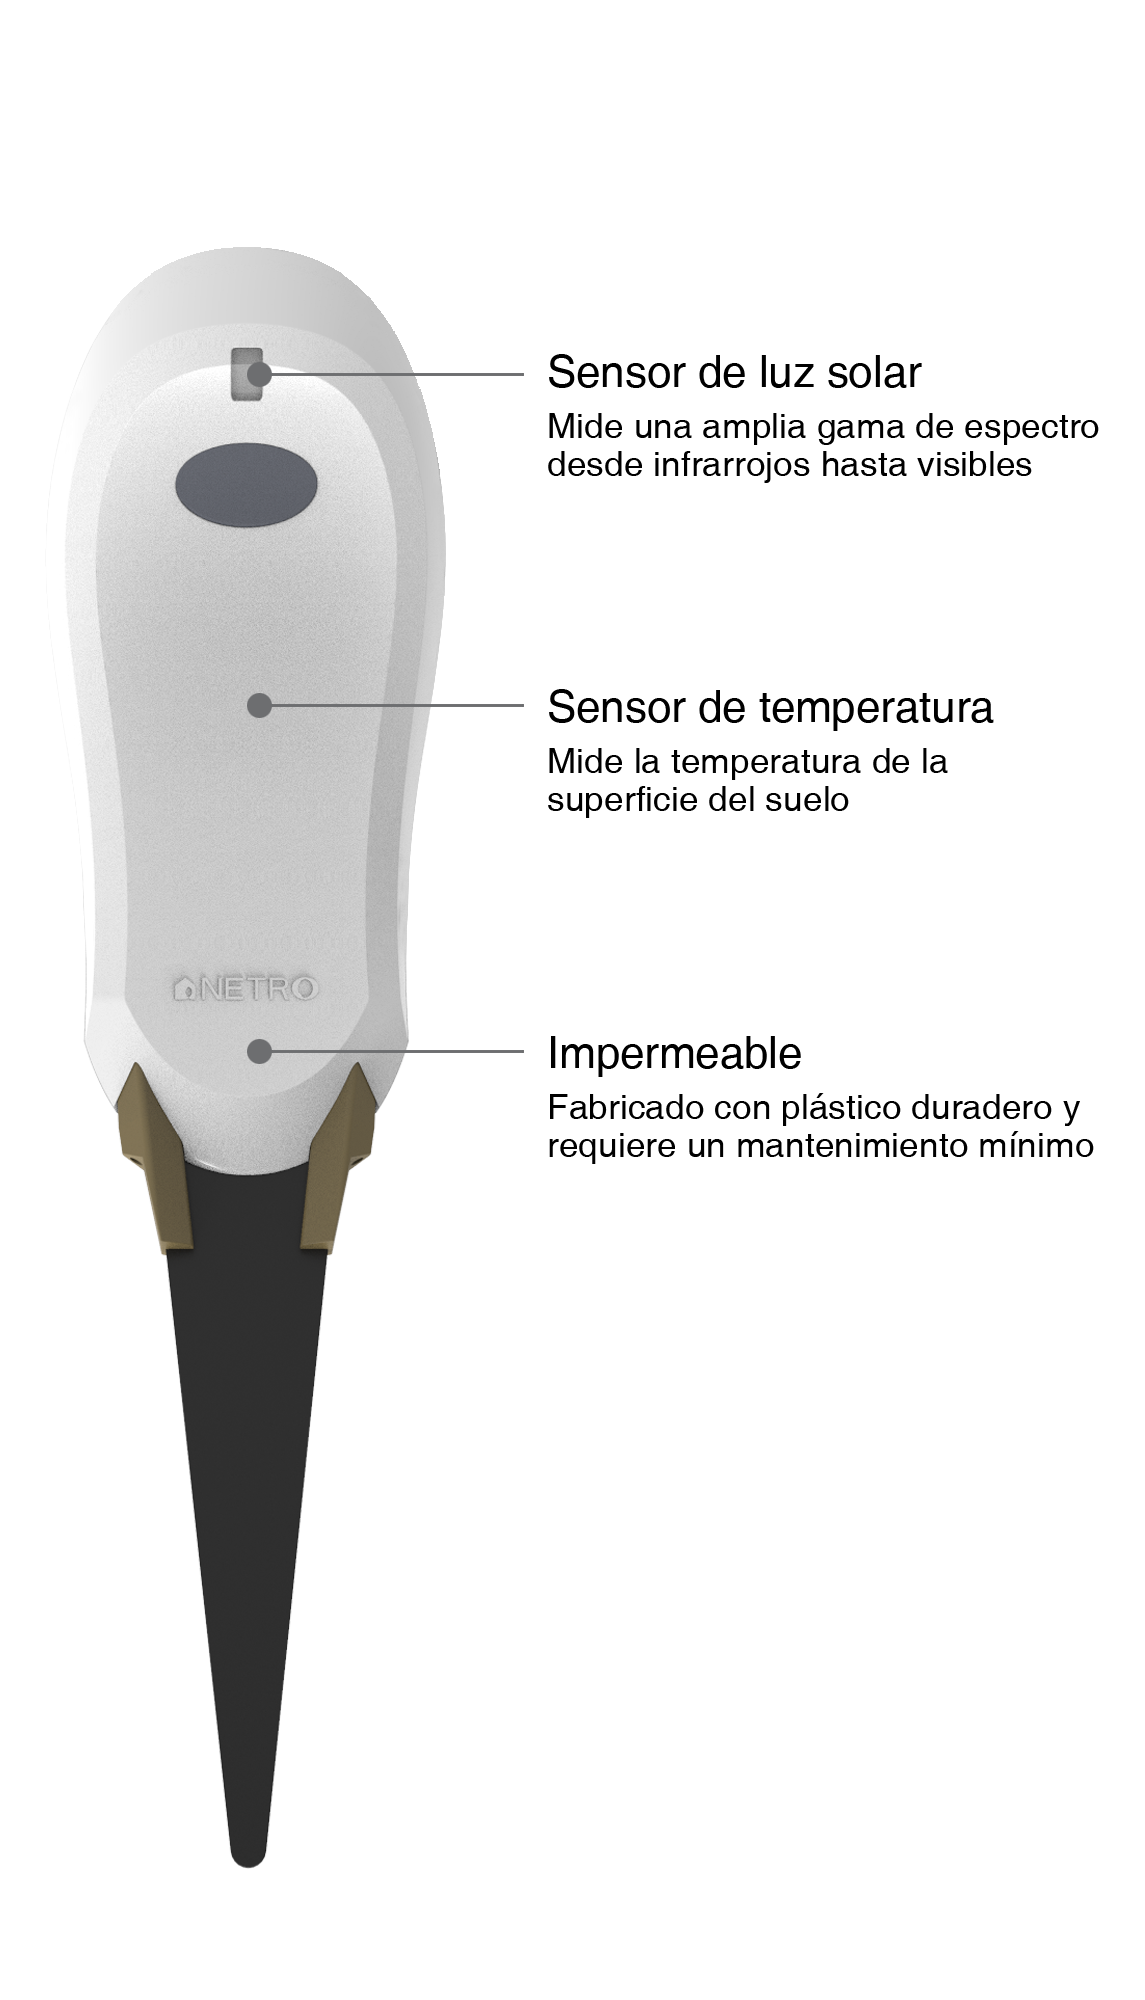 Netro Whisperer Gen2 equipped with sunlight sensor that measures a wide range of spectrum from infrared to visible. Netro Whisperer equipped with temperature sensor that measures ground surface temperature. The Netro Whisperer is waterproof.